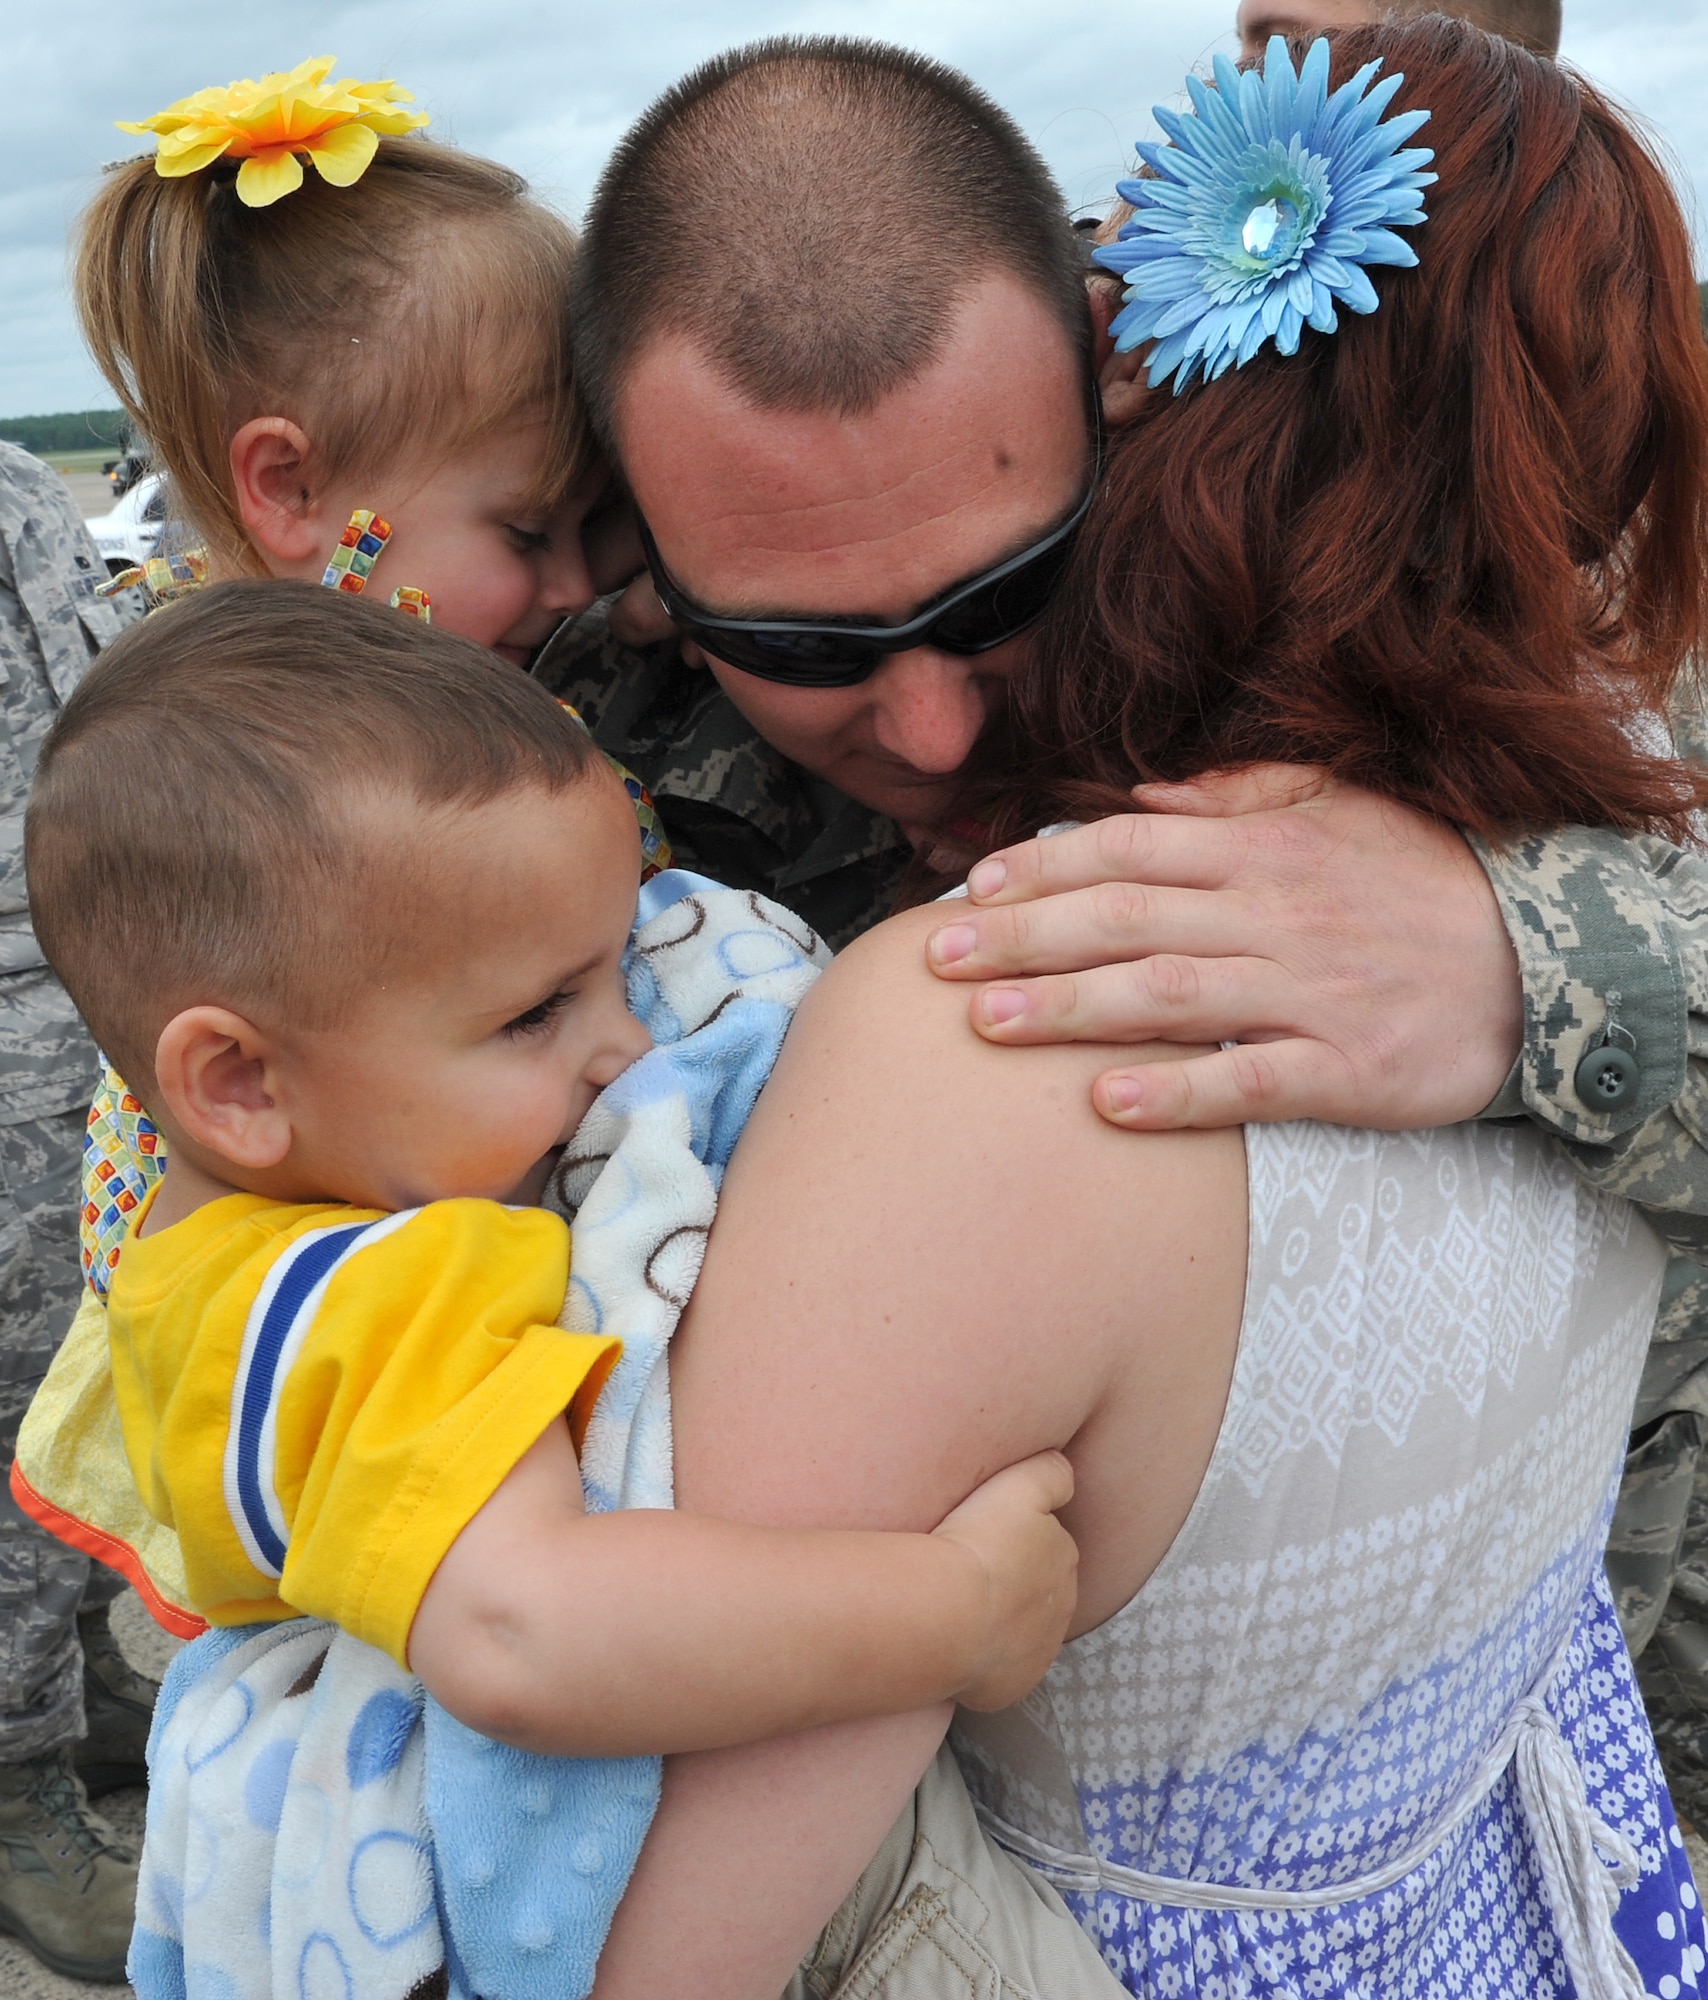 Staff Sgt. Louis Bell, 19th Aircraft Maintenance Squadron crew chief, receives a warm embrace from his family May 21, 2011. Nearly 200 Team Little Rock Airmen reunited with family members and friends Saturday after returning from months of deployments supporting operations in Southwest Asia. (U.S. Air Force photo/Staff Sgt. Chris Willis)